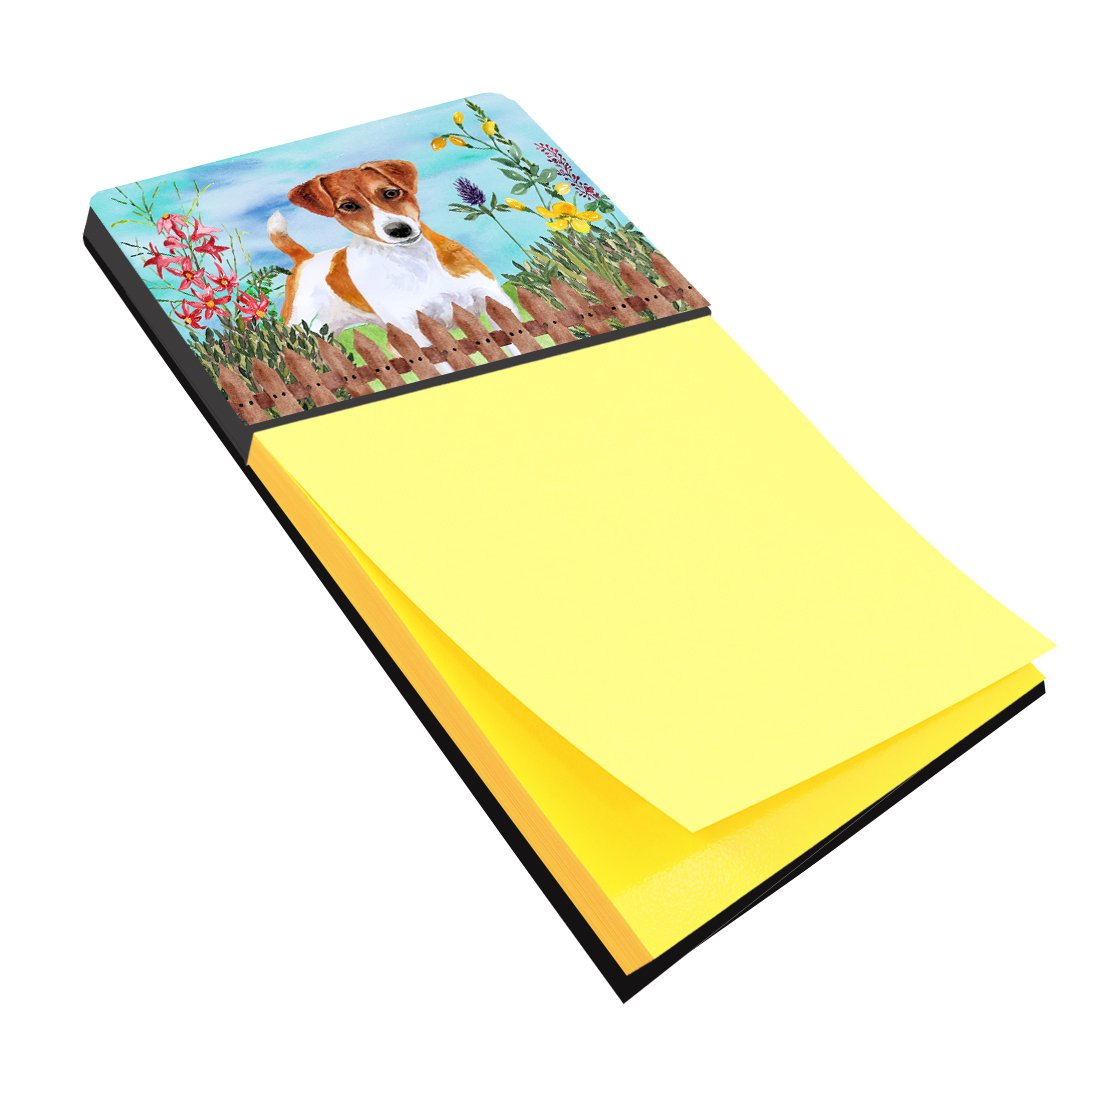 Jack Russell Terrier Spring Sticky Note Holder CK1251SN by Caroline's Treasures